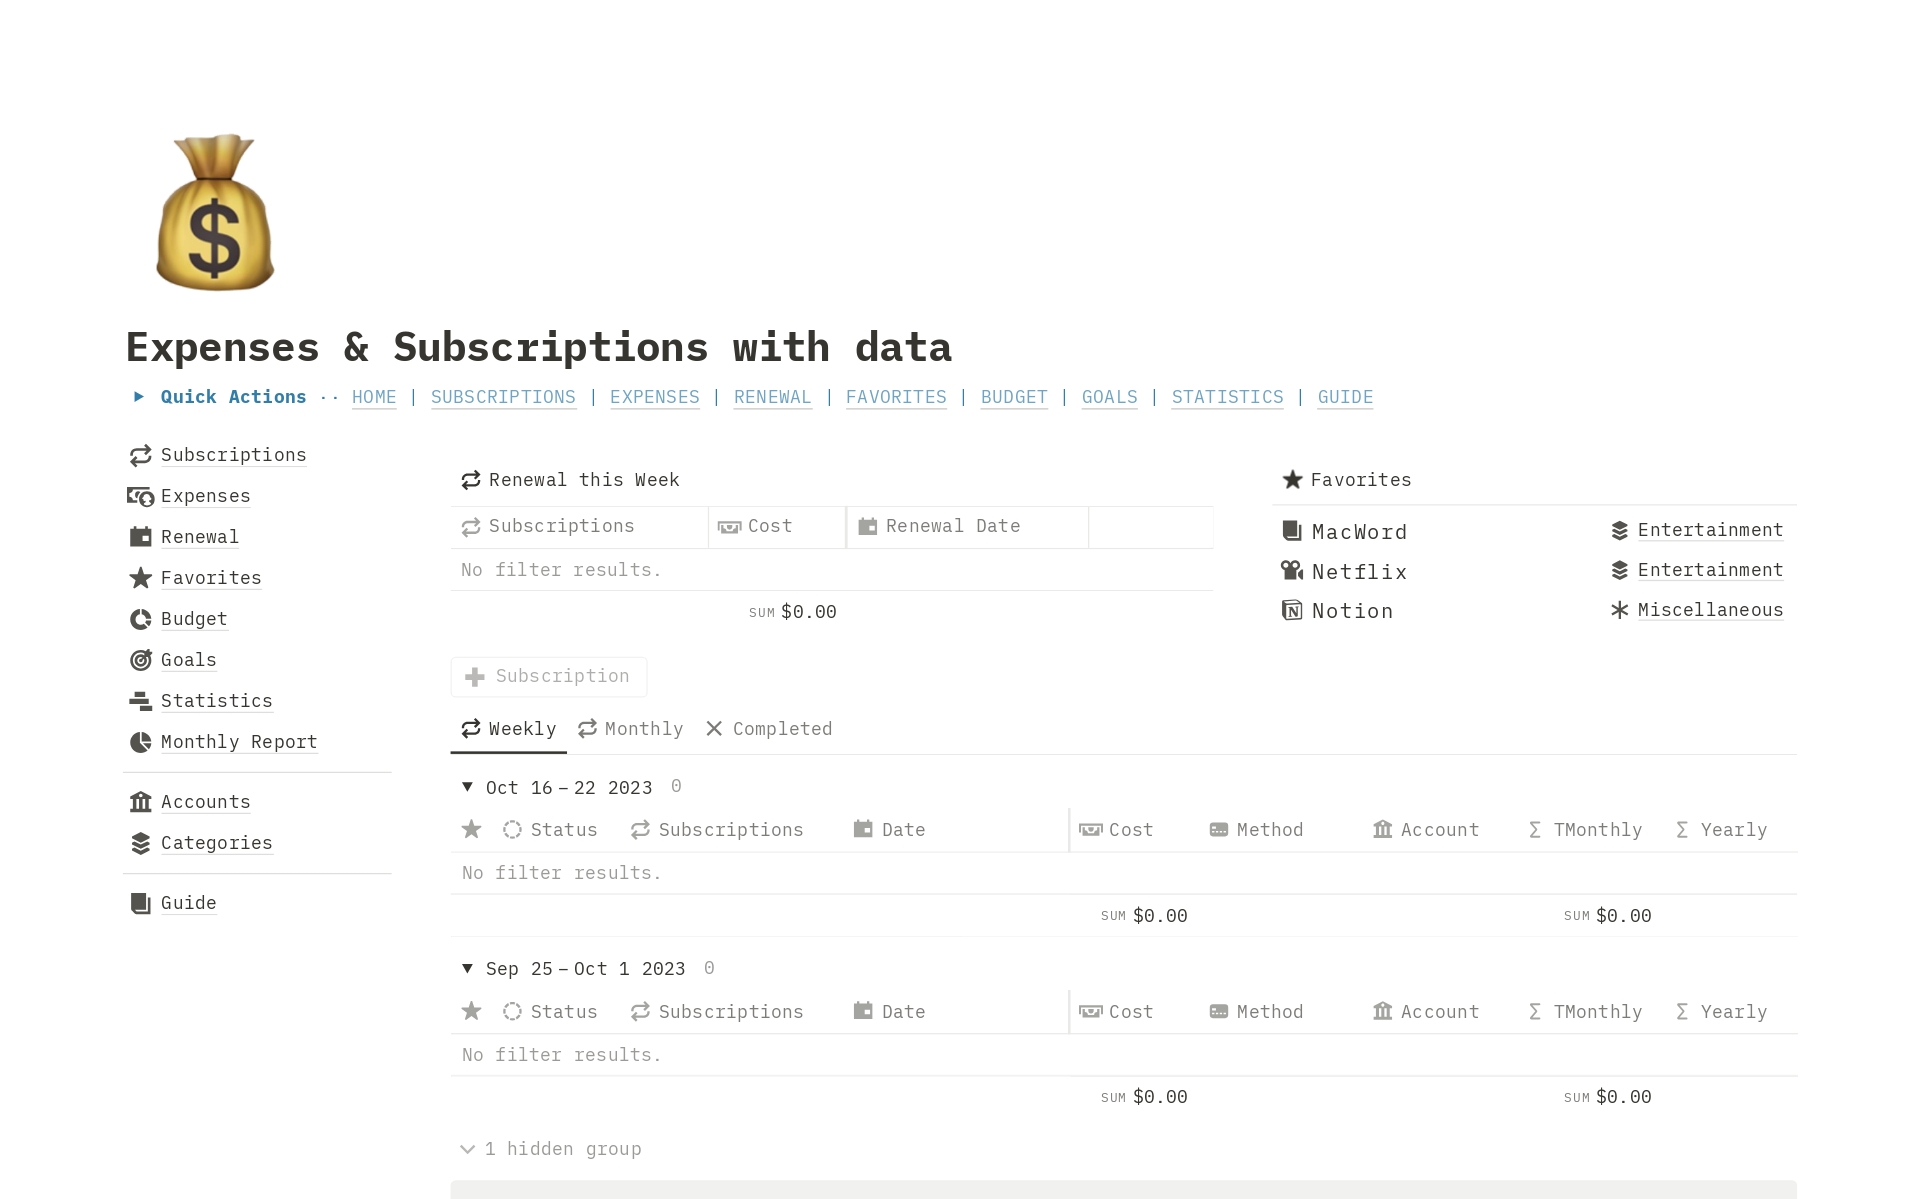 Notion Expenses & Subscriptions template is designed to help you manage your expenses and subscription services in one place.
🪙 Subscriptions 
💵 Expenses 
💳 Renewal
📊 Budget
📆 Monthly Reports
🎯 Goals